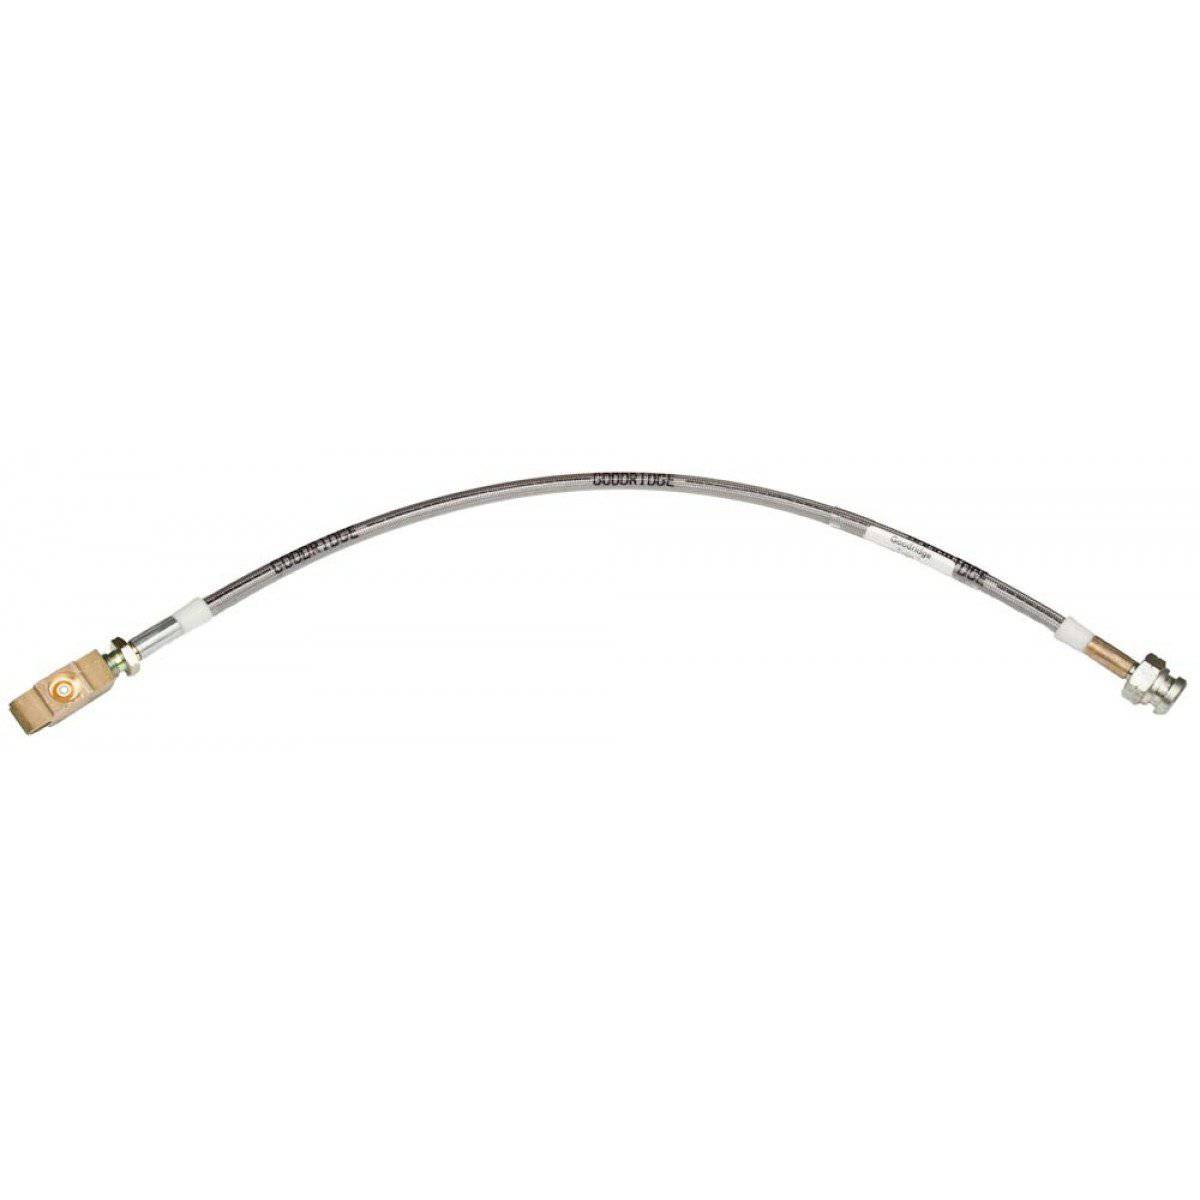 Braided Brake Line to suit GU Patrol w/ABS - Front Right Hand Centre | QIKAZZ 4x4 & Camping